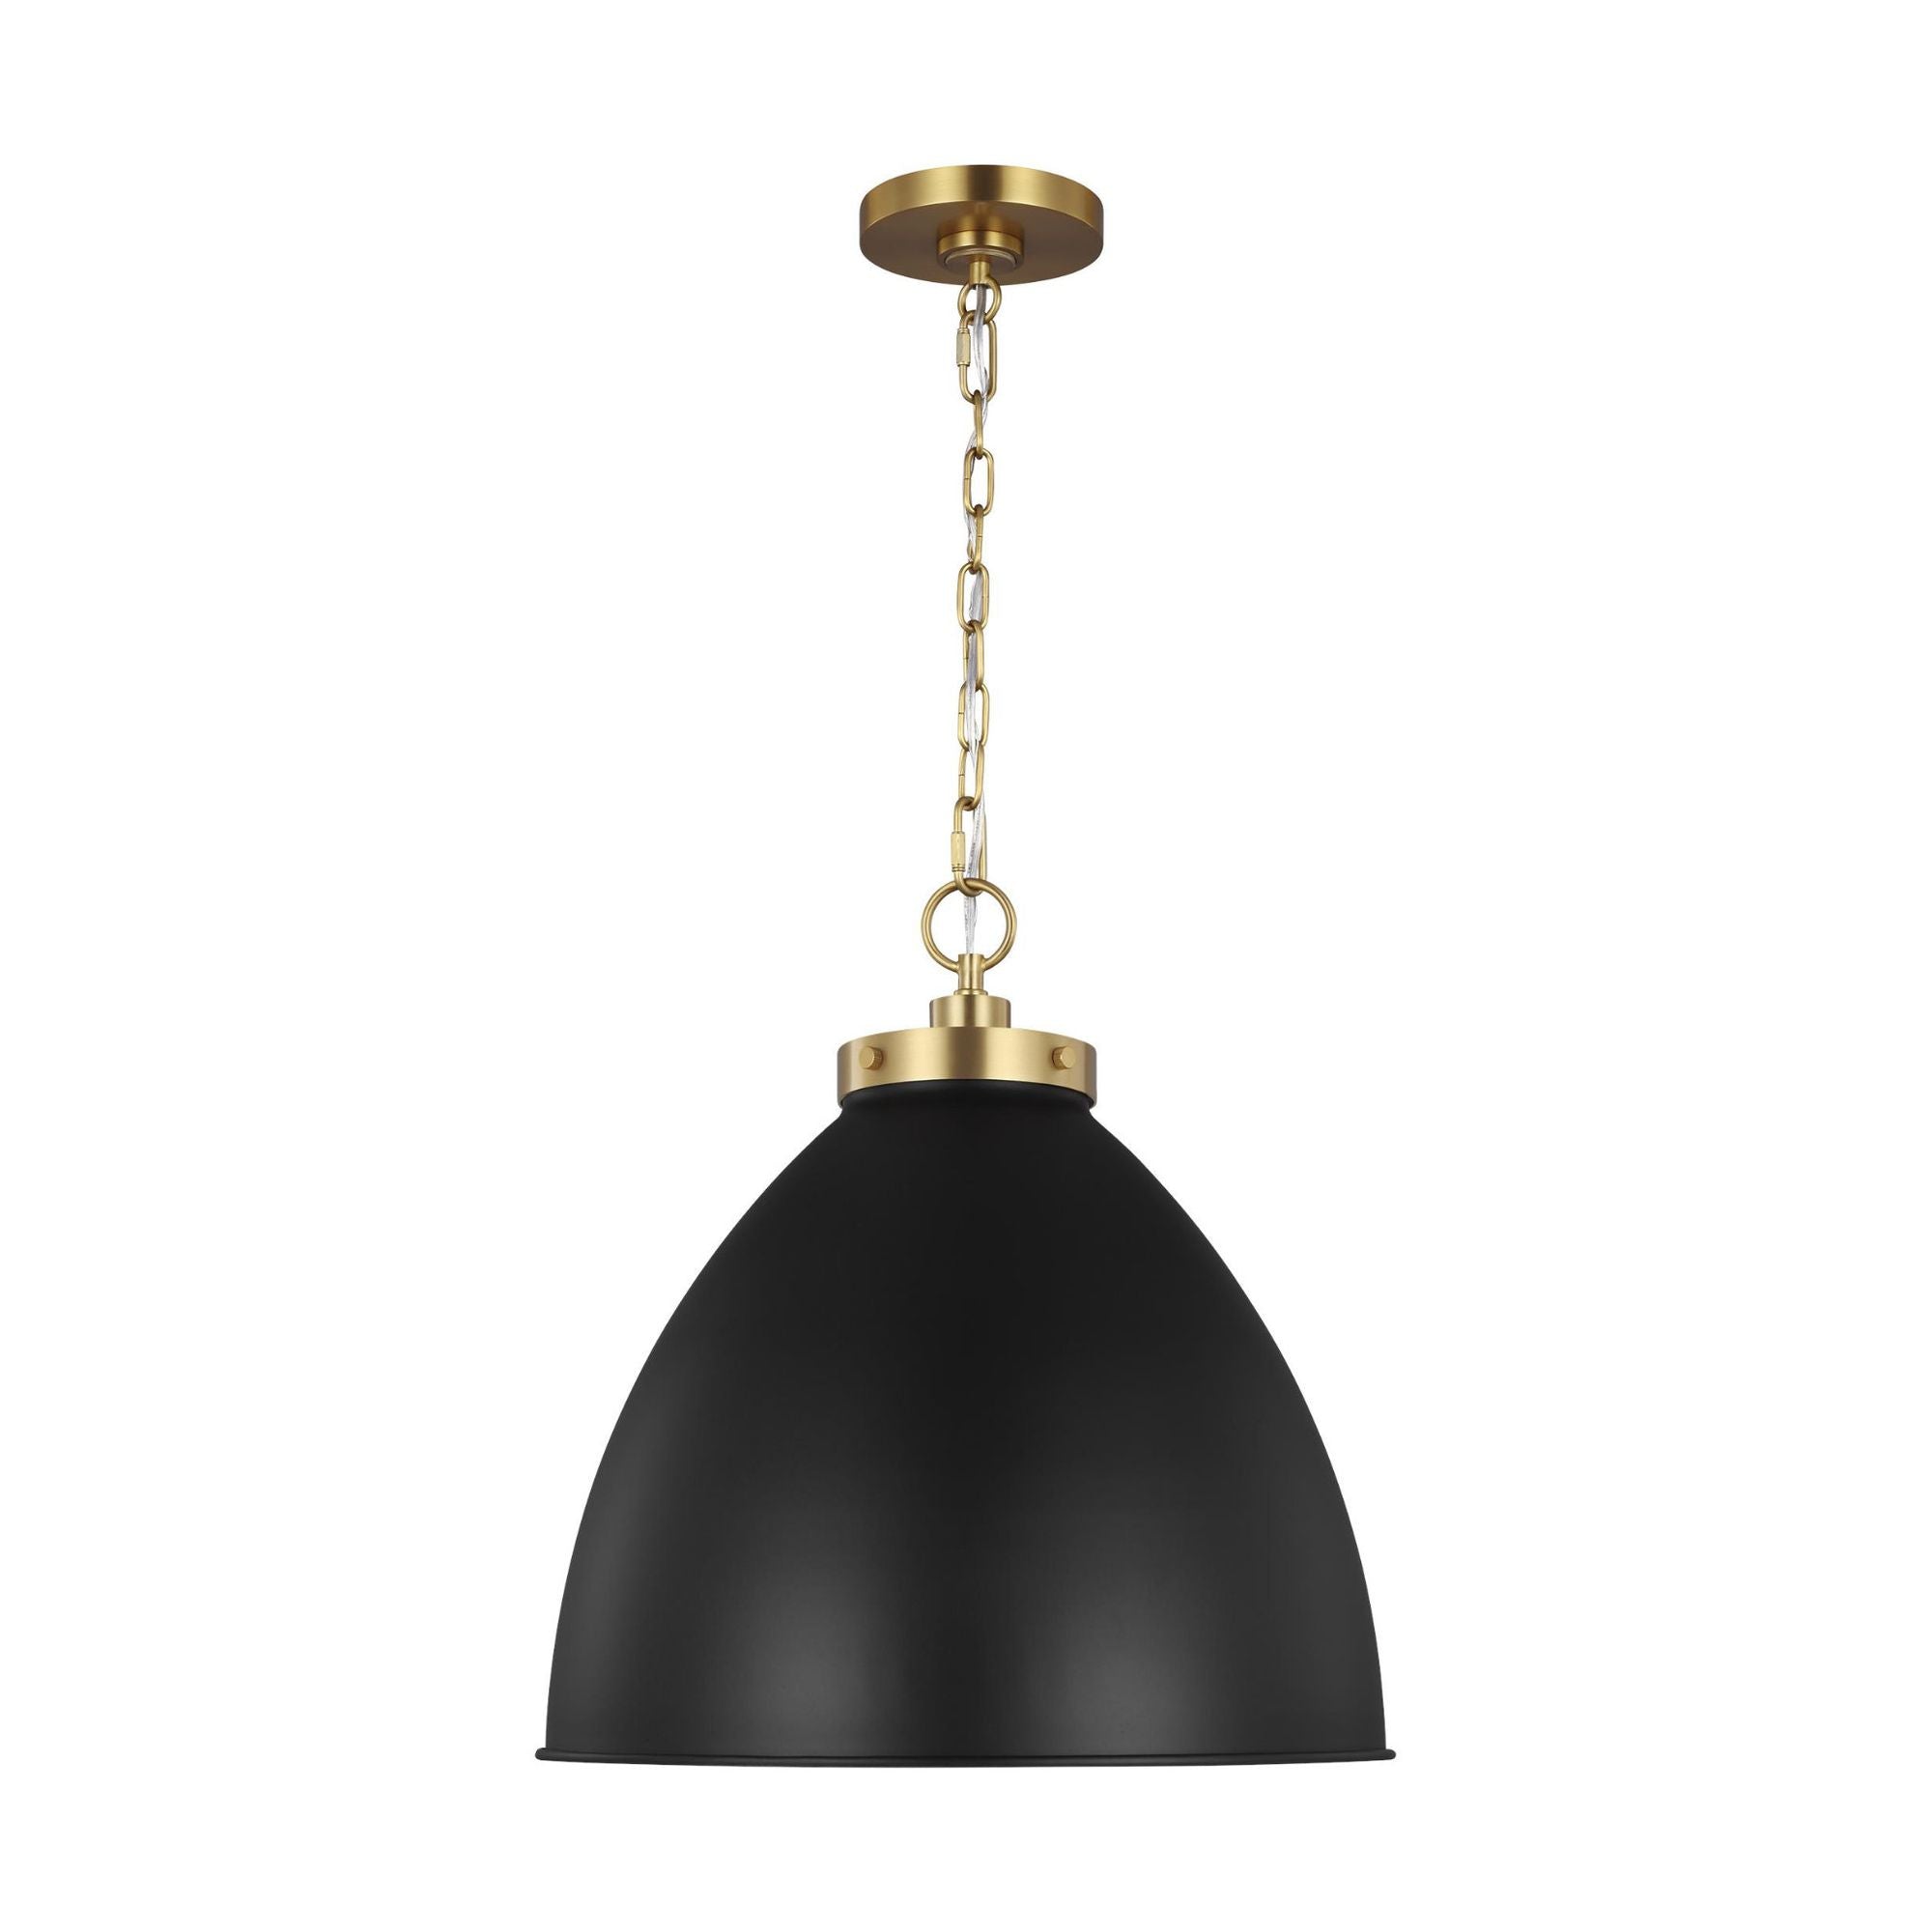 Chapman & Myers Wellfleet Large Dome Pendant in Midnight Black and Burnished Brass